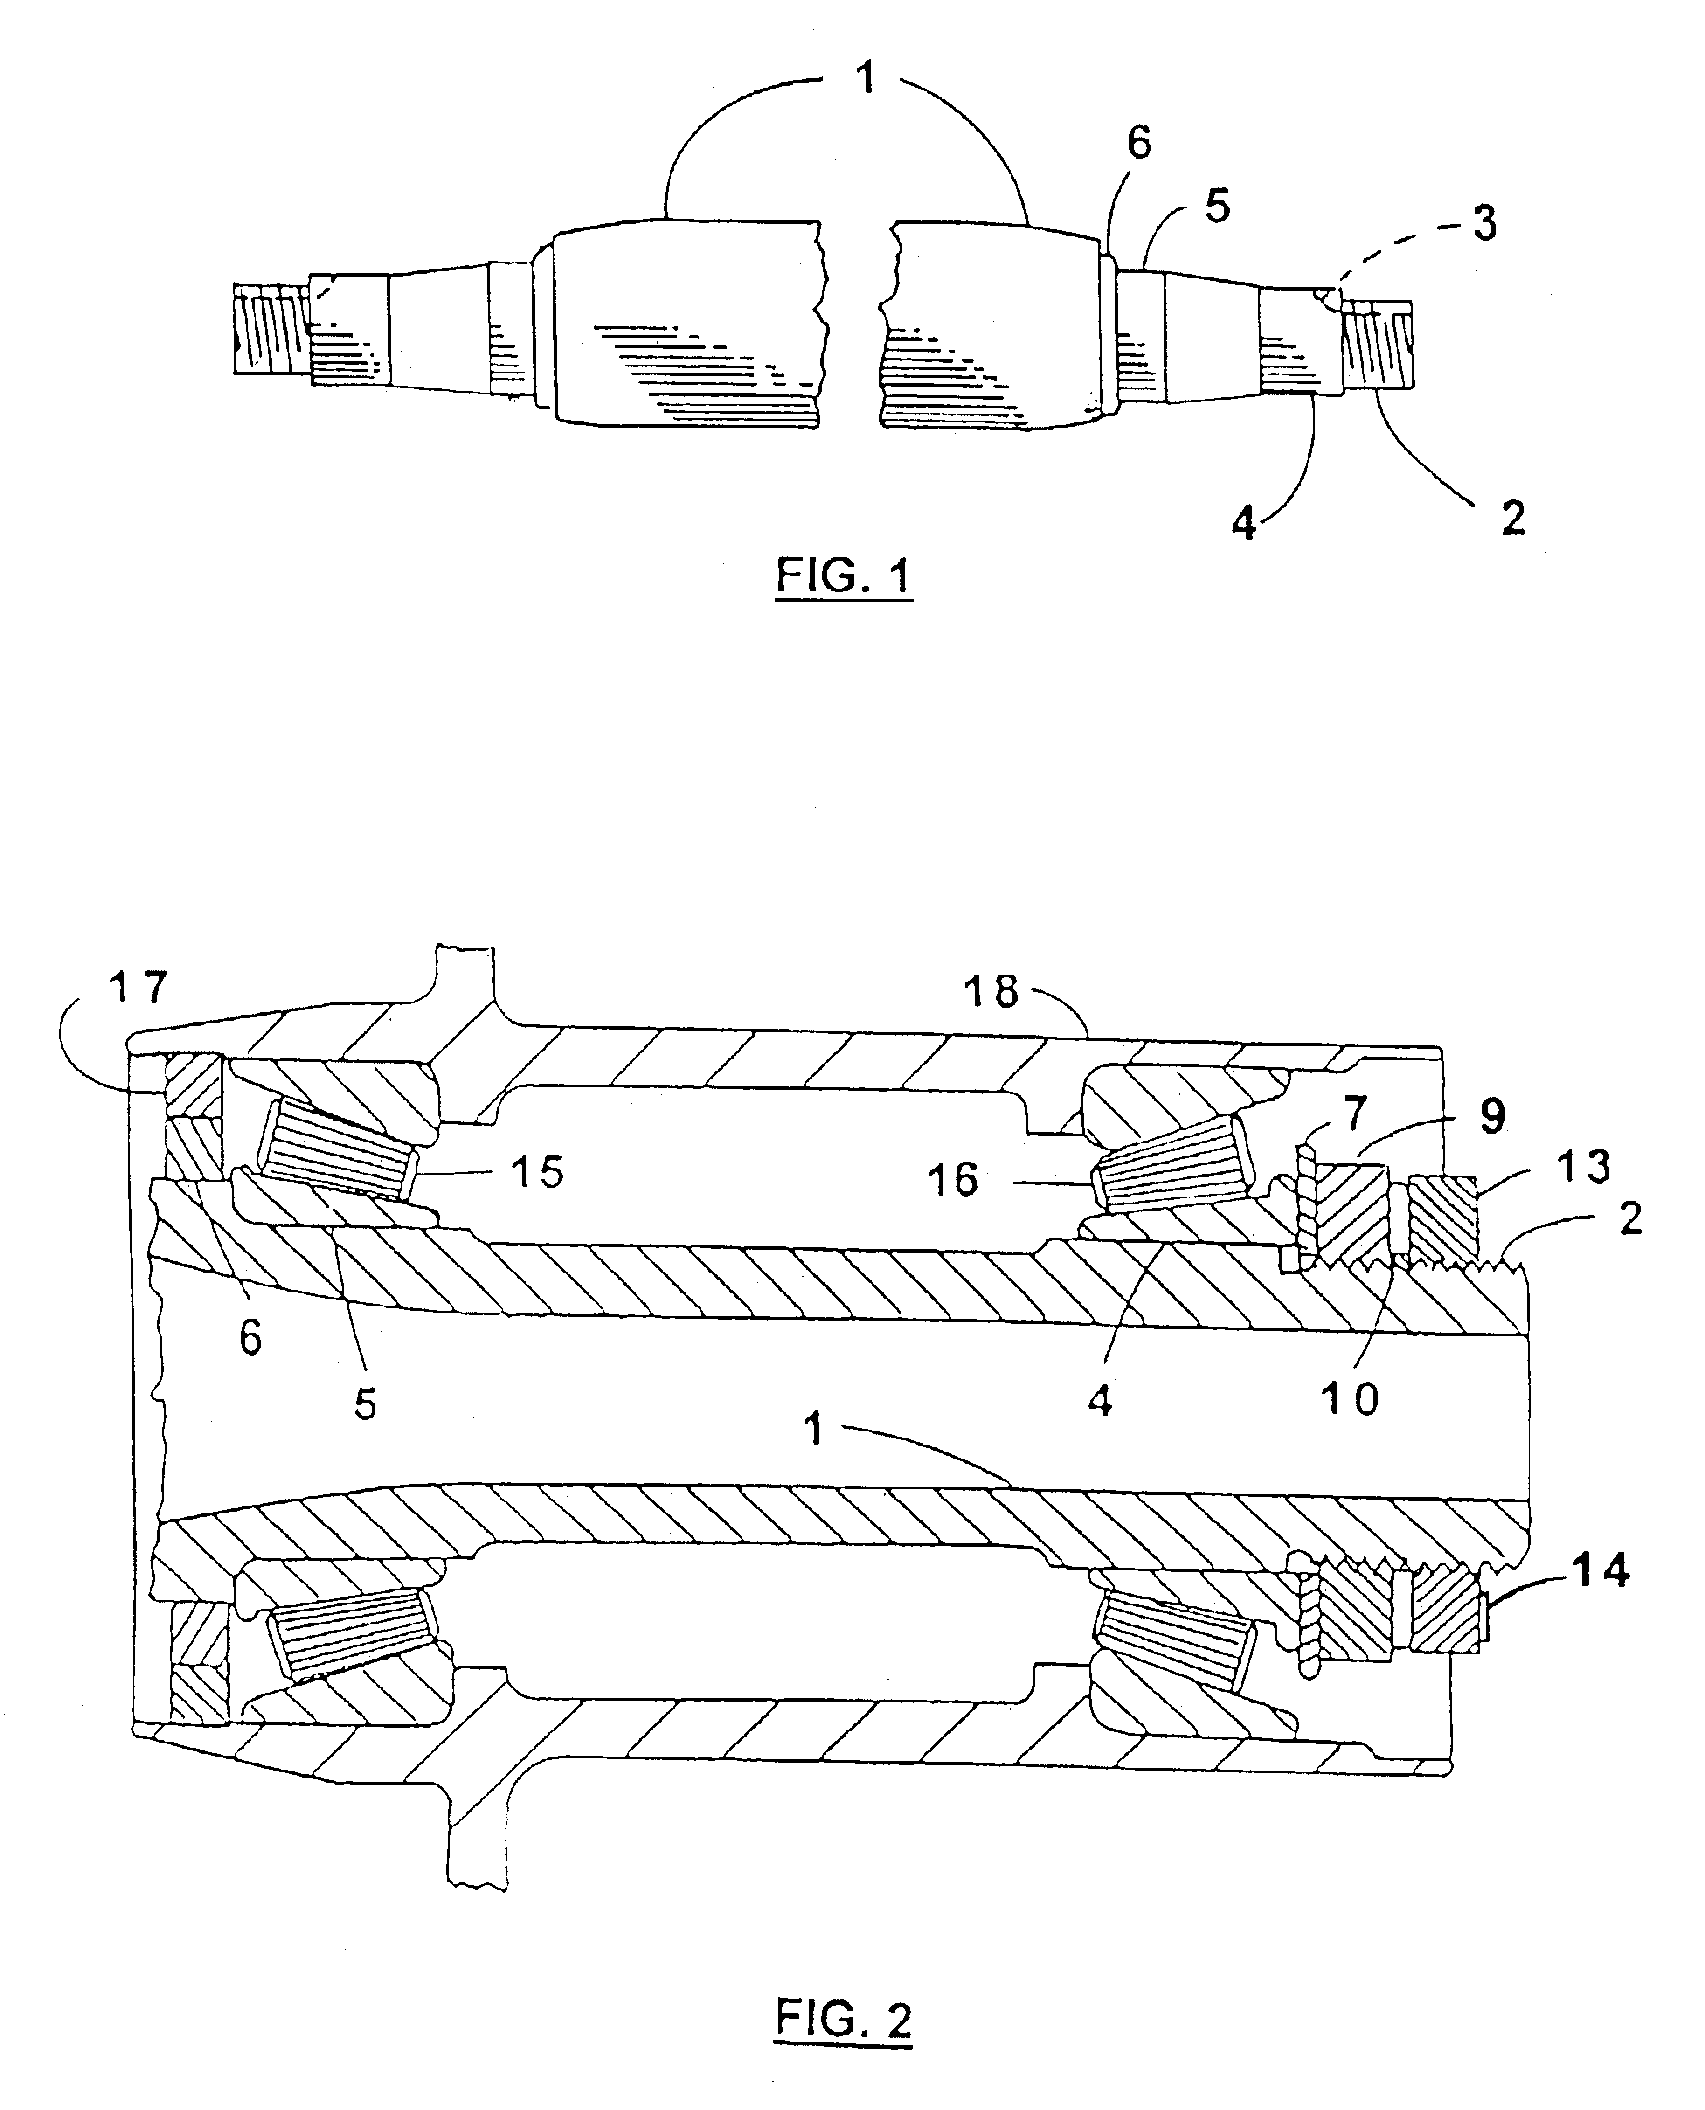 High-integrity interlocking nut and washer system